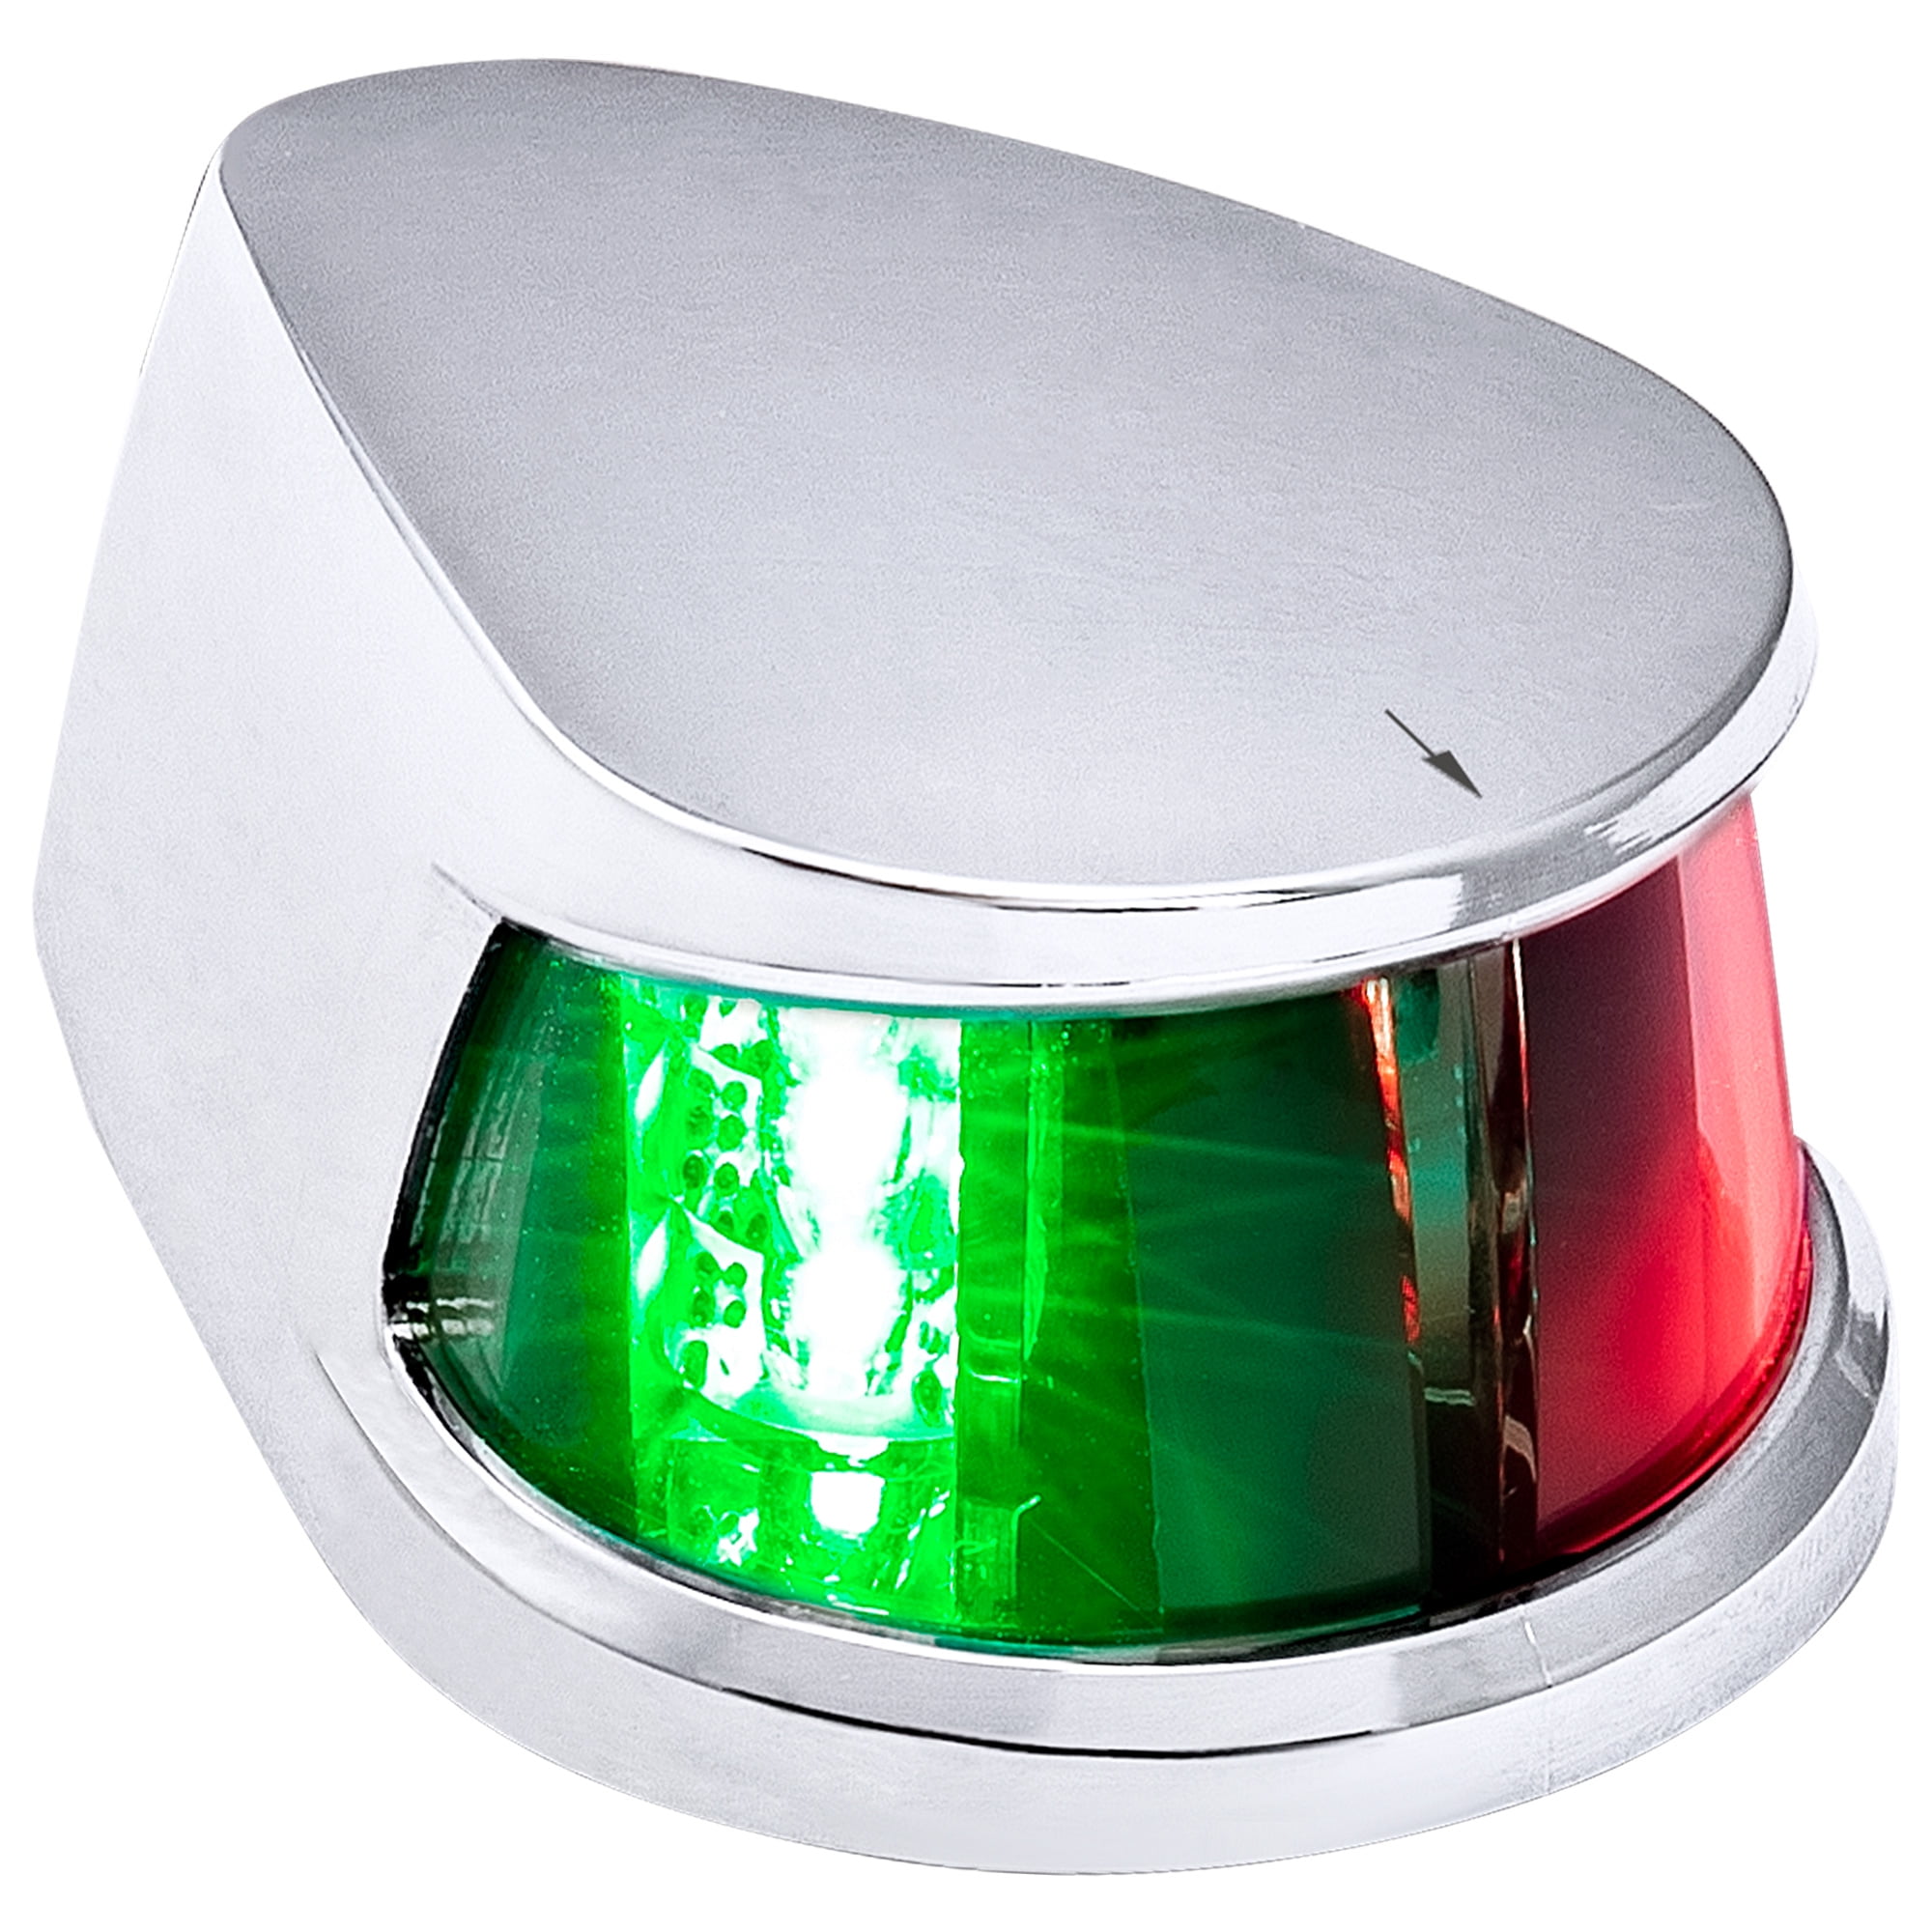 Red Green LED Marine Navigation Lights for Fishing Boats USCG ABYC A-16 1NM IP67 